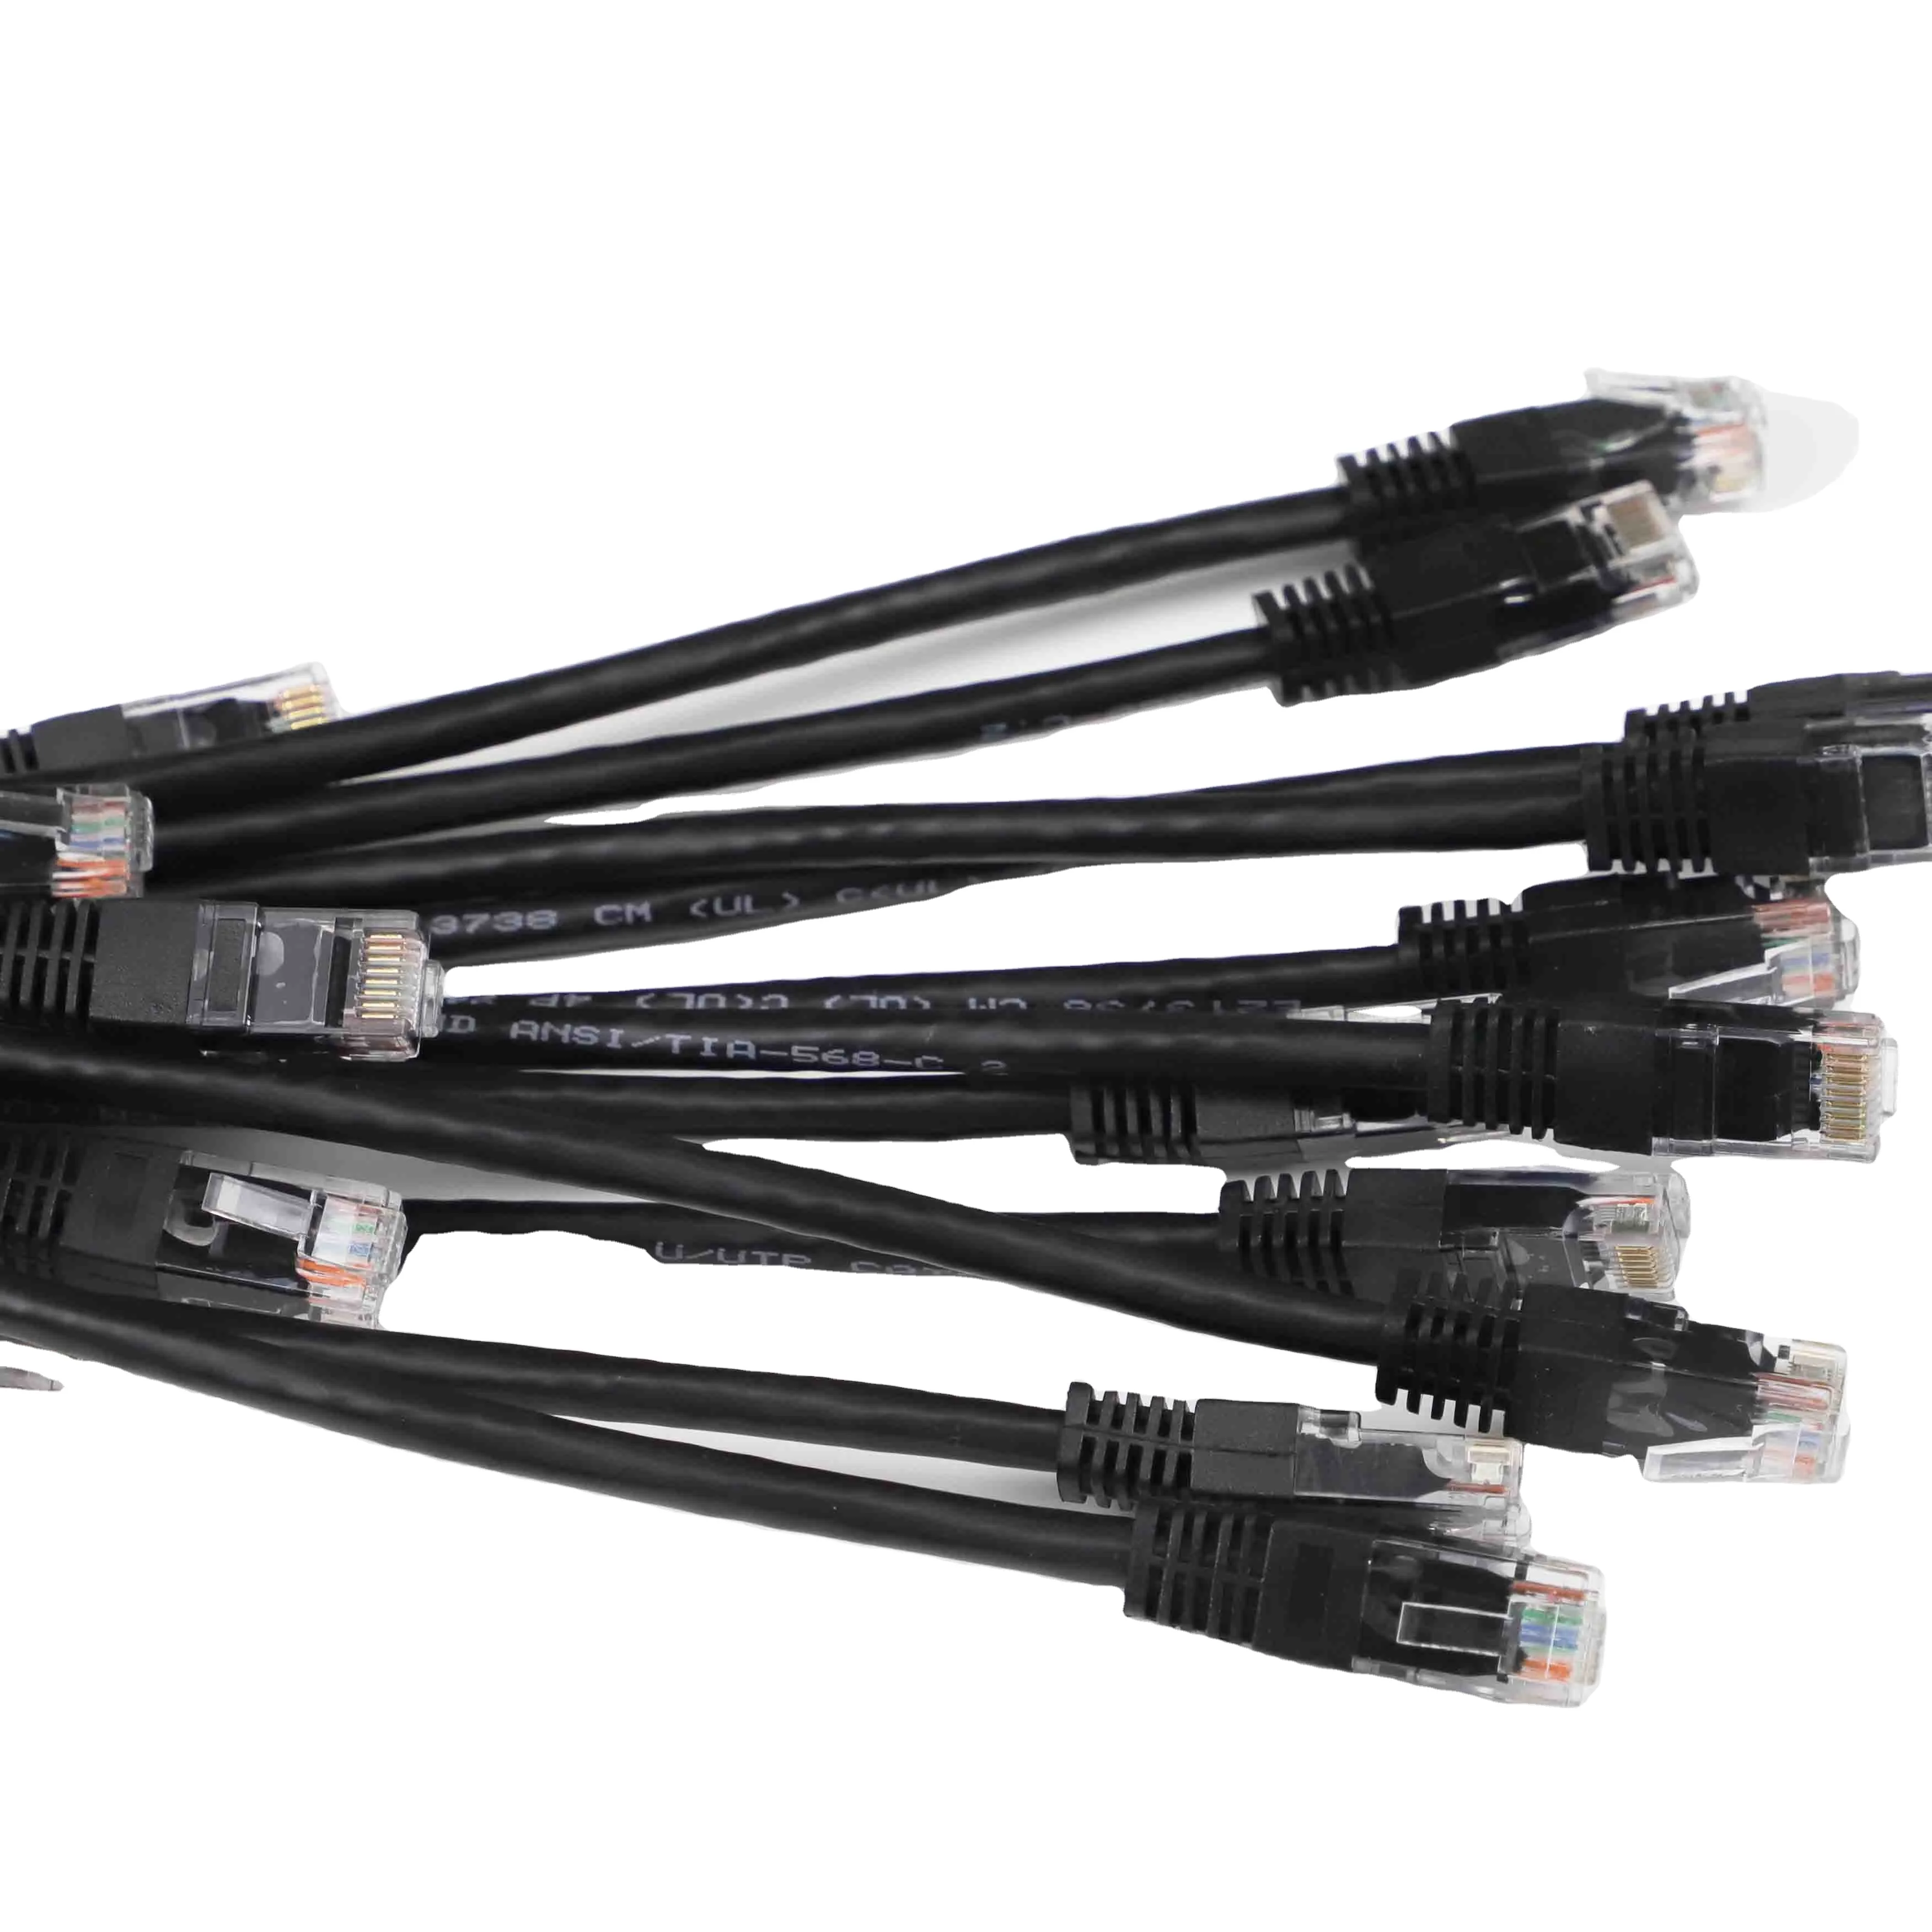 
ethernet Outdoor price 1000ft Cat6 Cat5 Network Cable for Computer  (1600110947344)